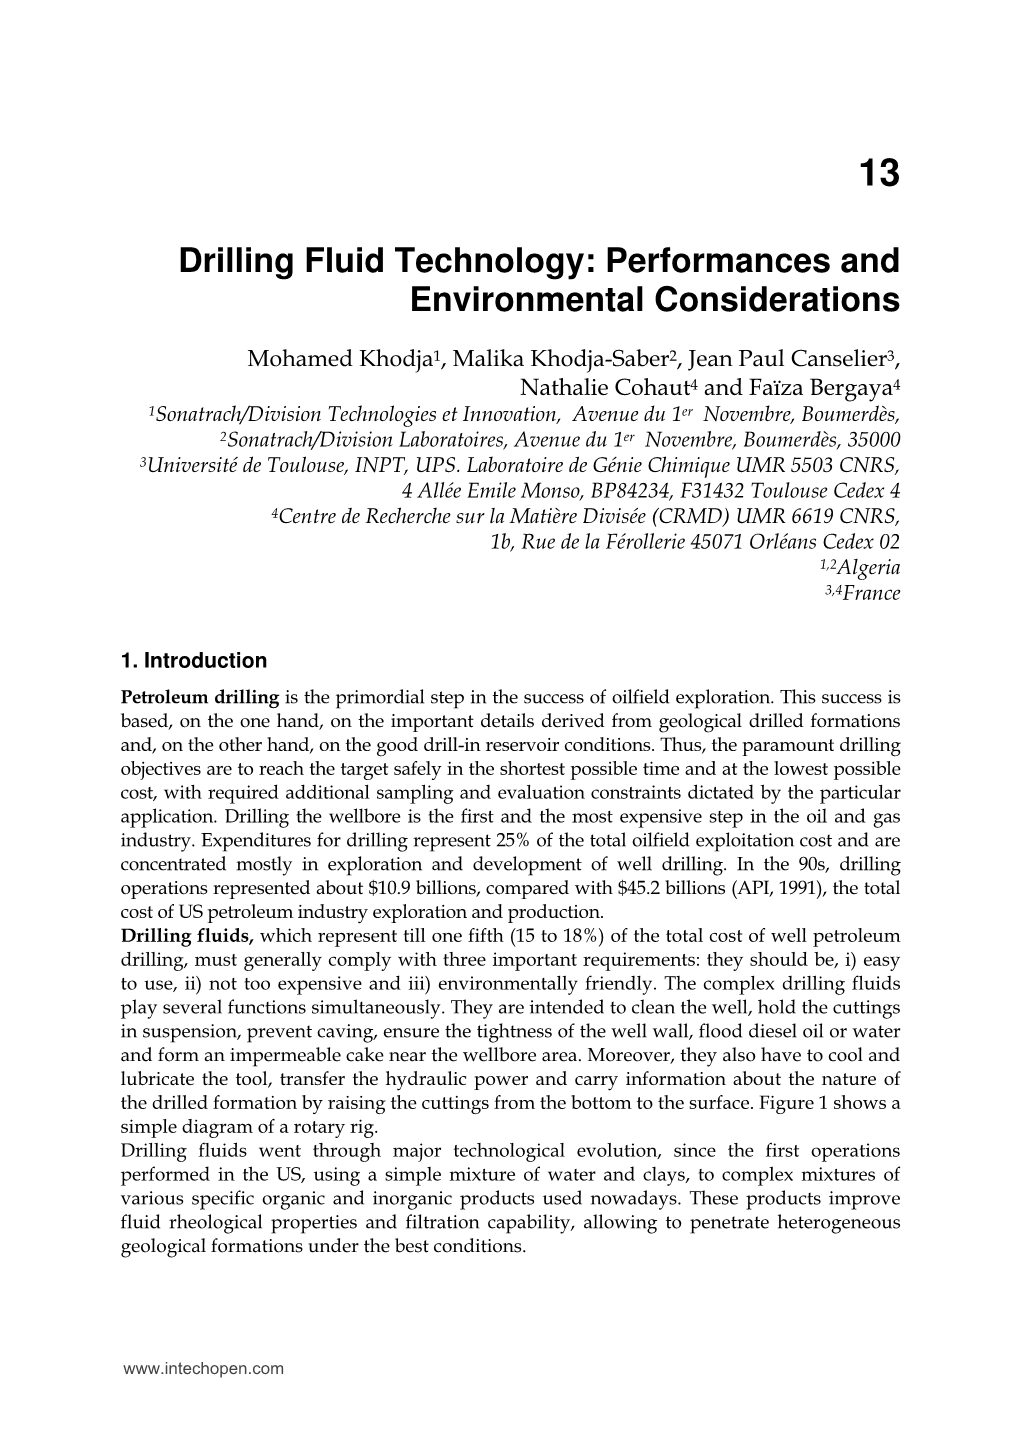 Drilling Fluid Technology: Performances and Environmental Considerations